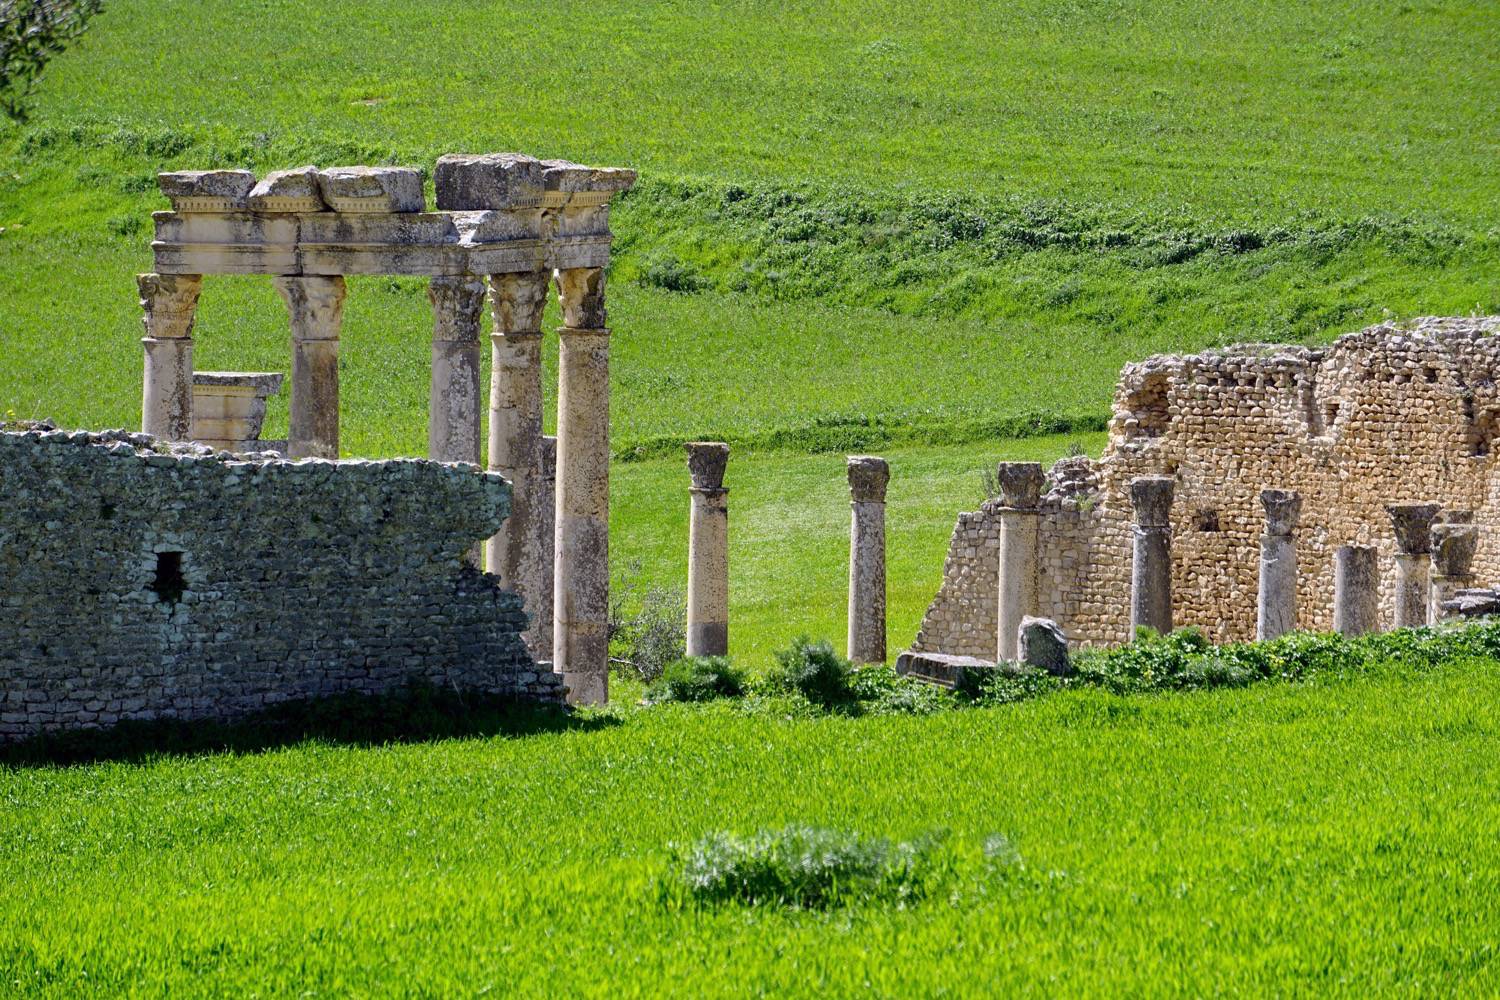 The columns of Junon Caelestis' temple in the countryside